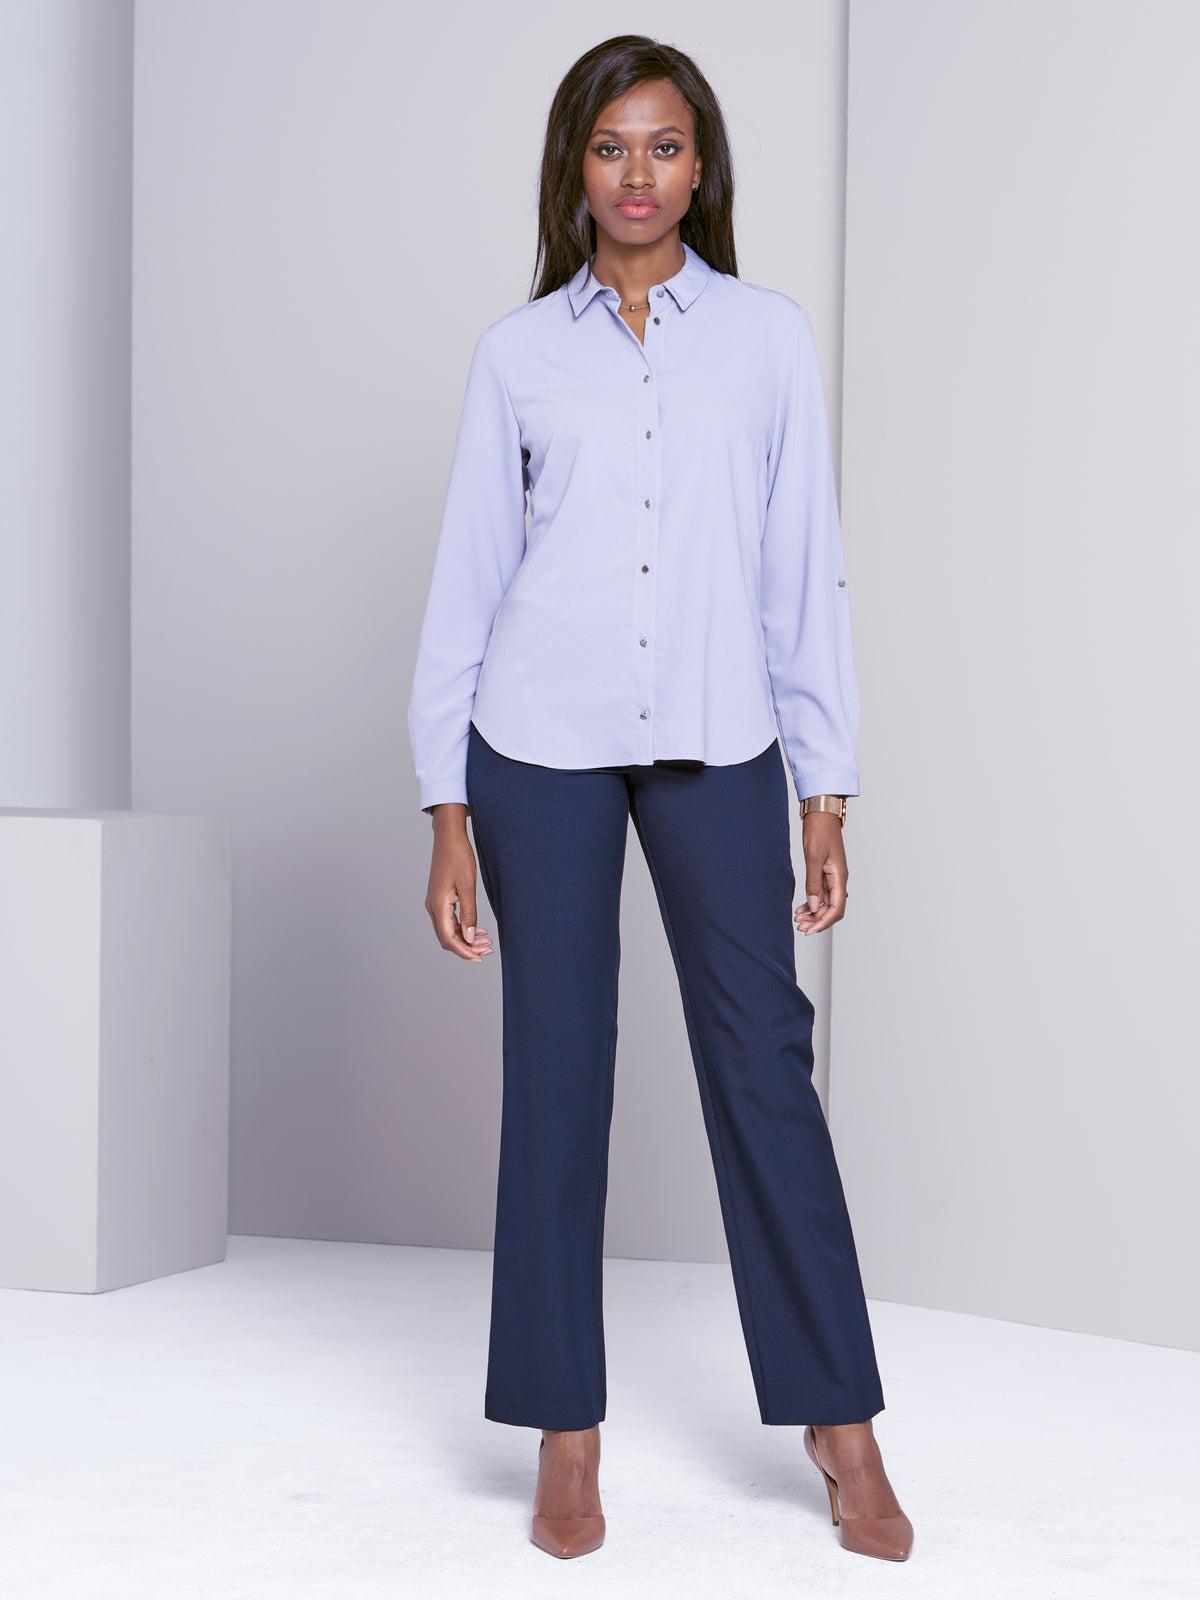 Cathy classic buttoned shirt - grey